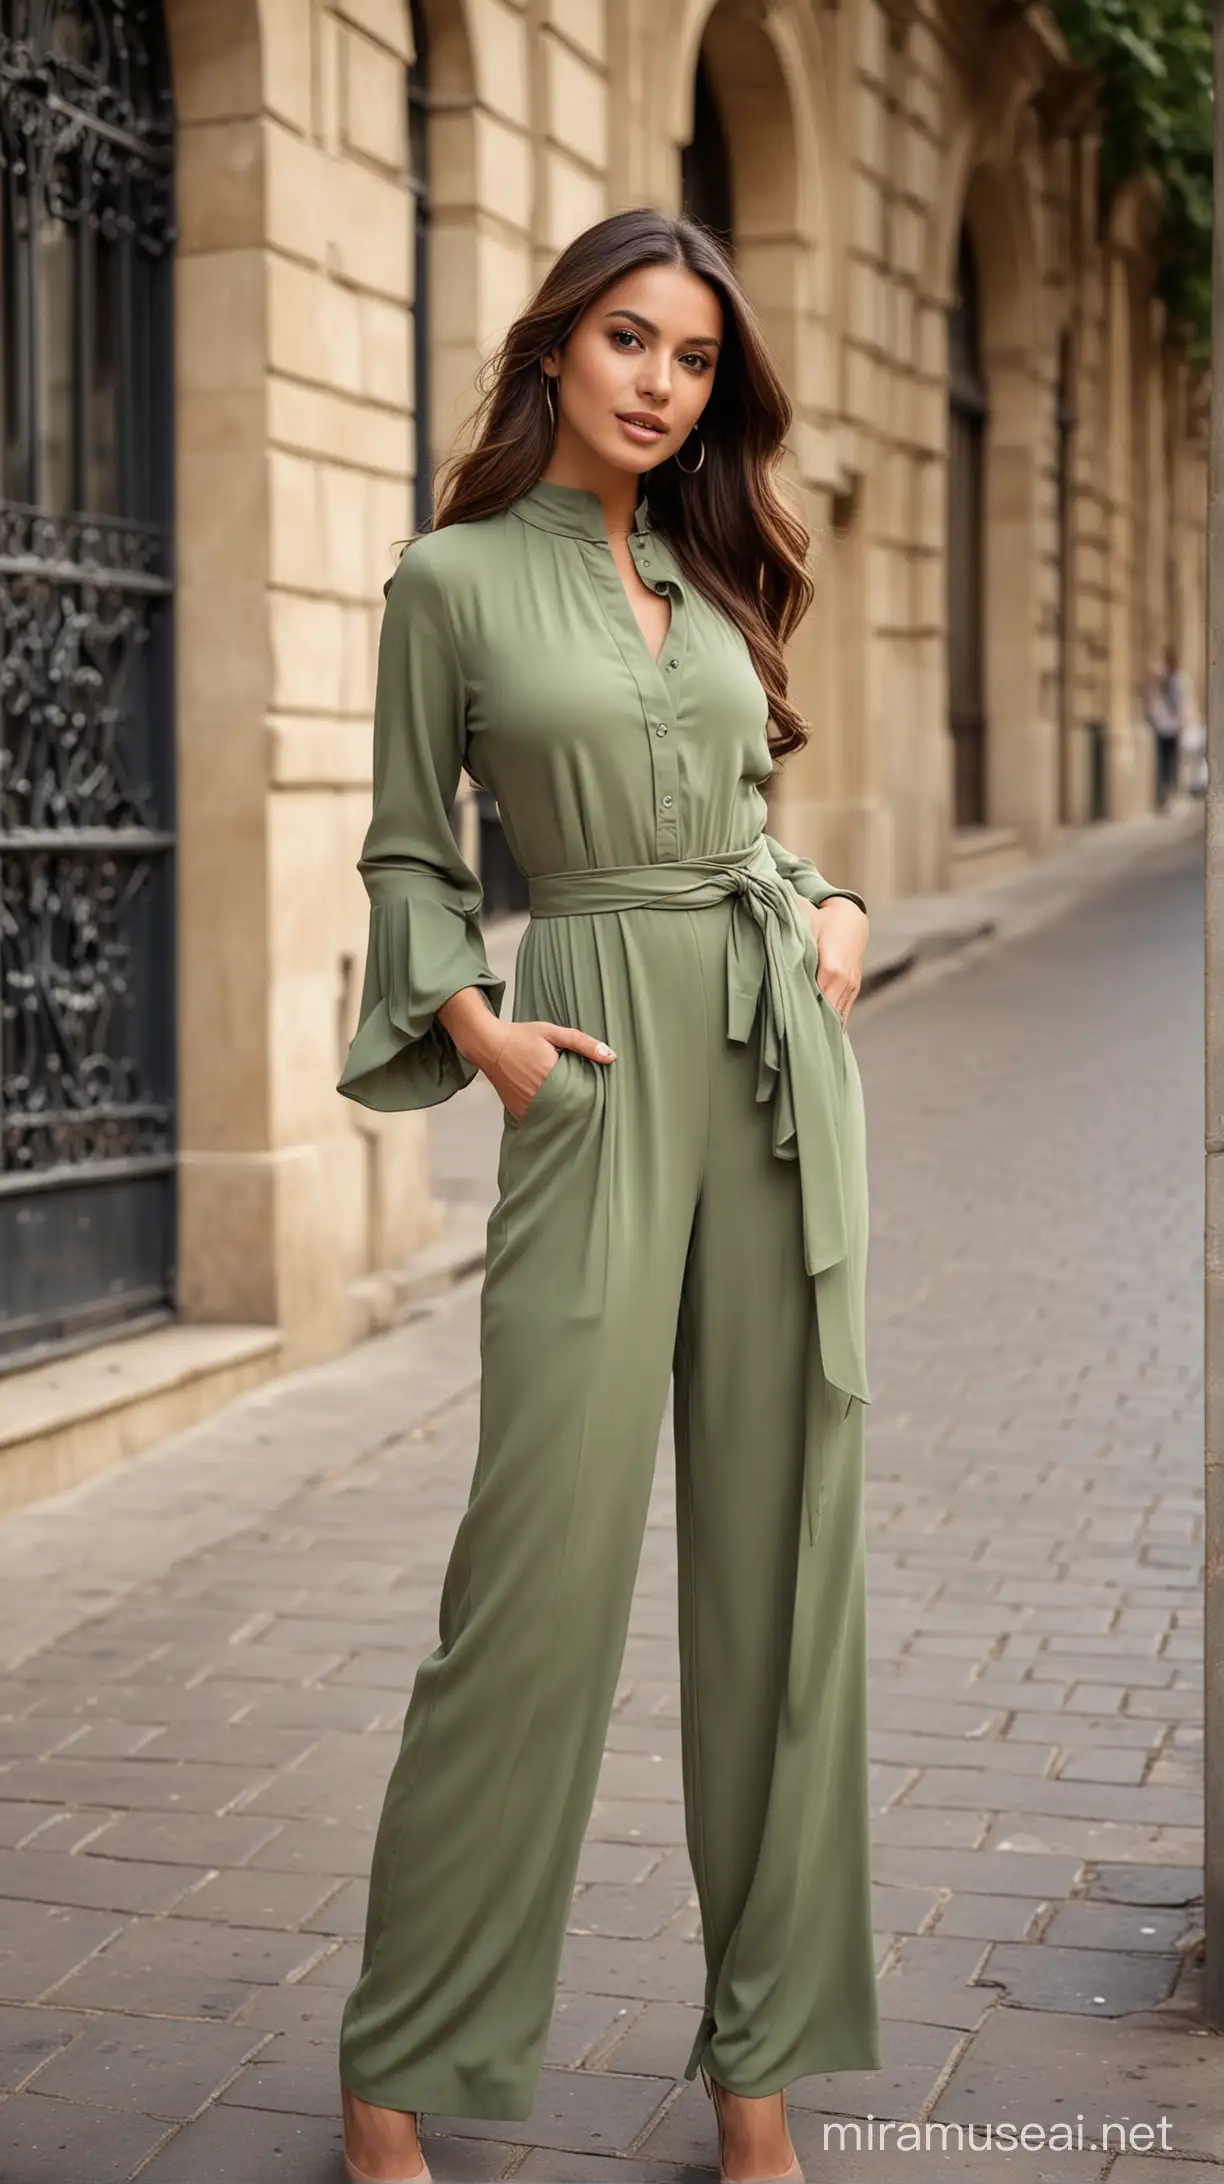 Chic Latina Model in Modest HighNeck Jumpsuit Parisian Outdoor Fashion Photoshoot